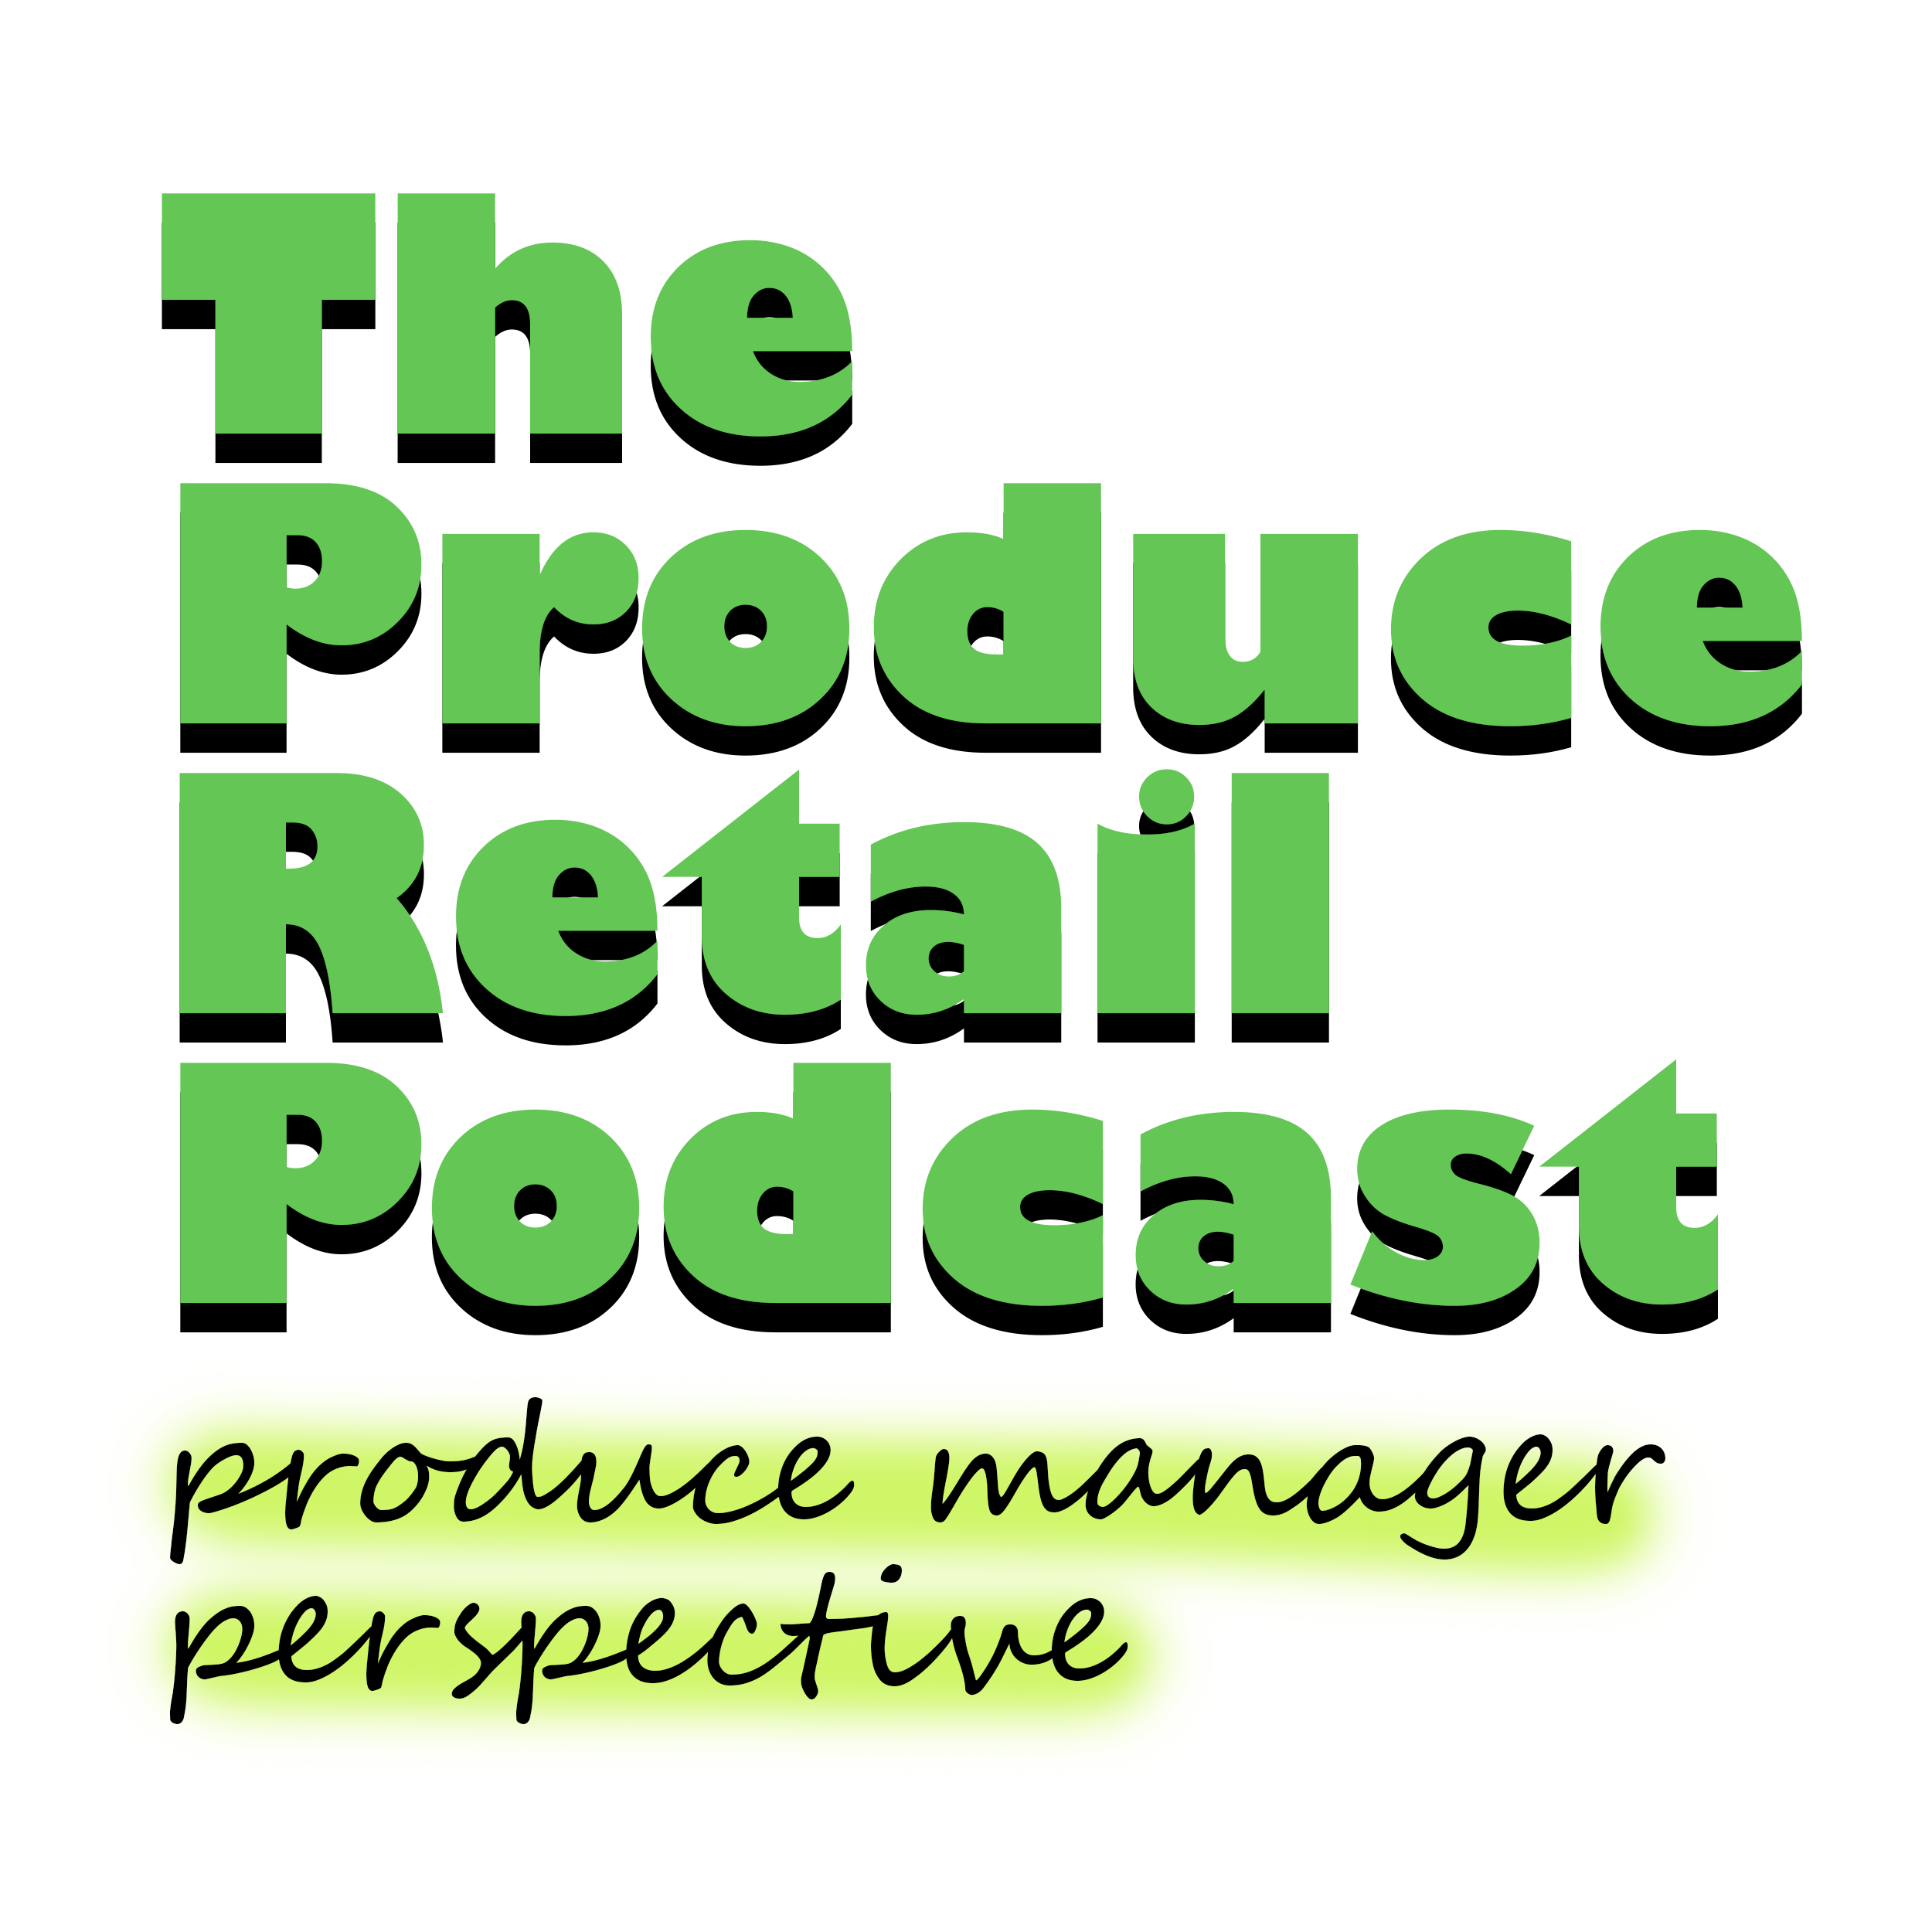 Harps VP of produce operations Mike Roberts on supporting produce managers — State of the Produce Manager Series